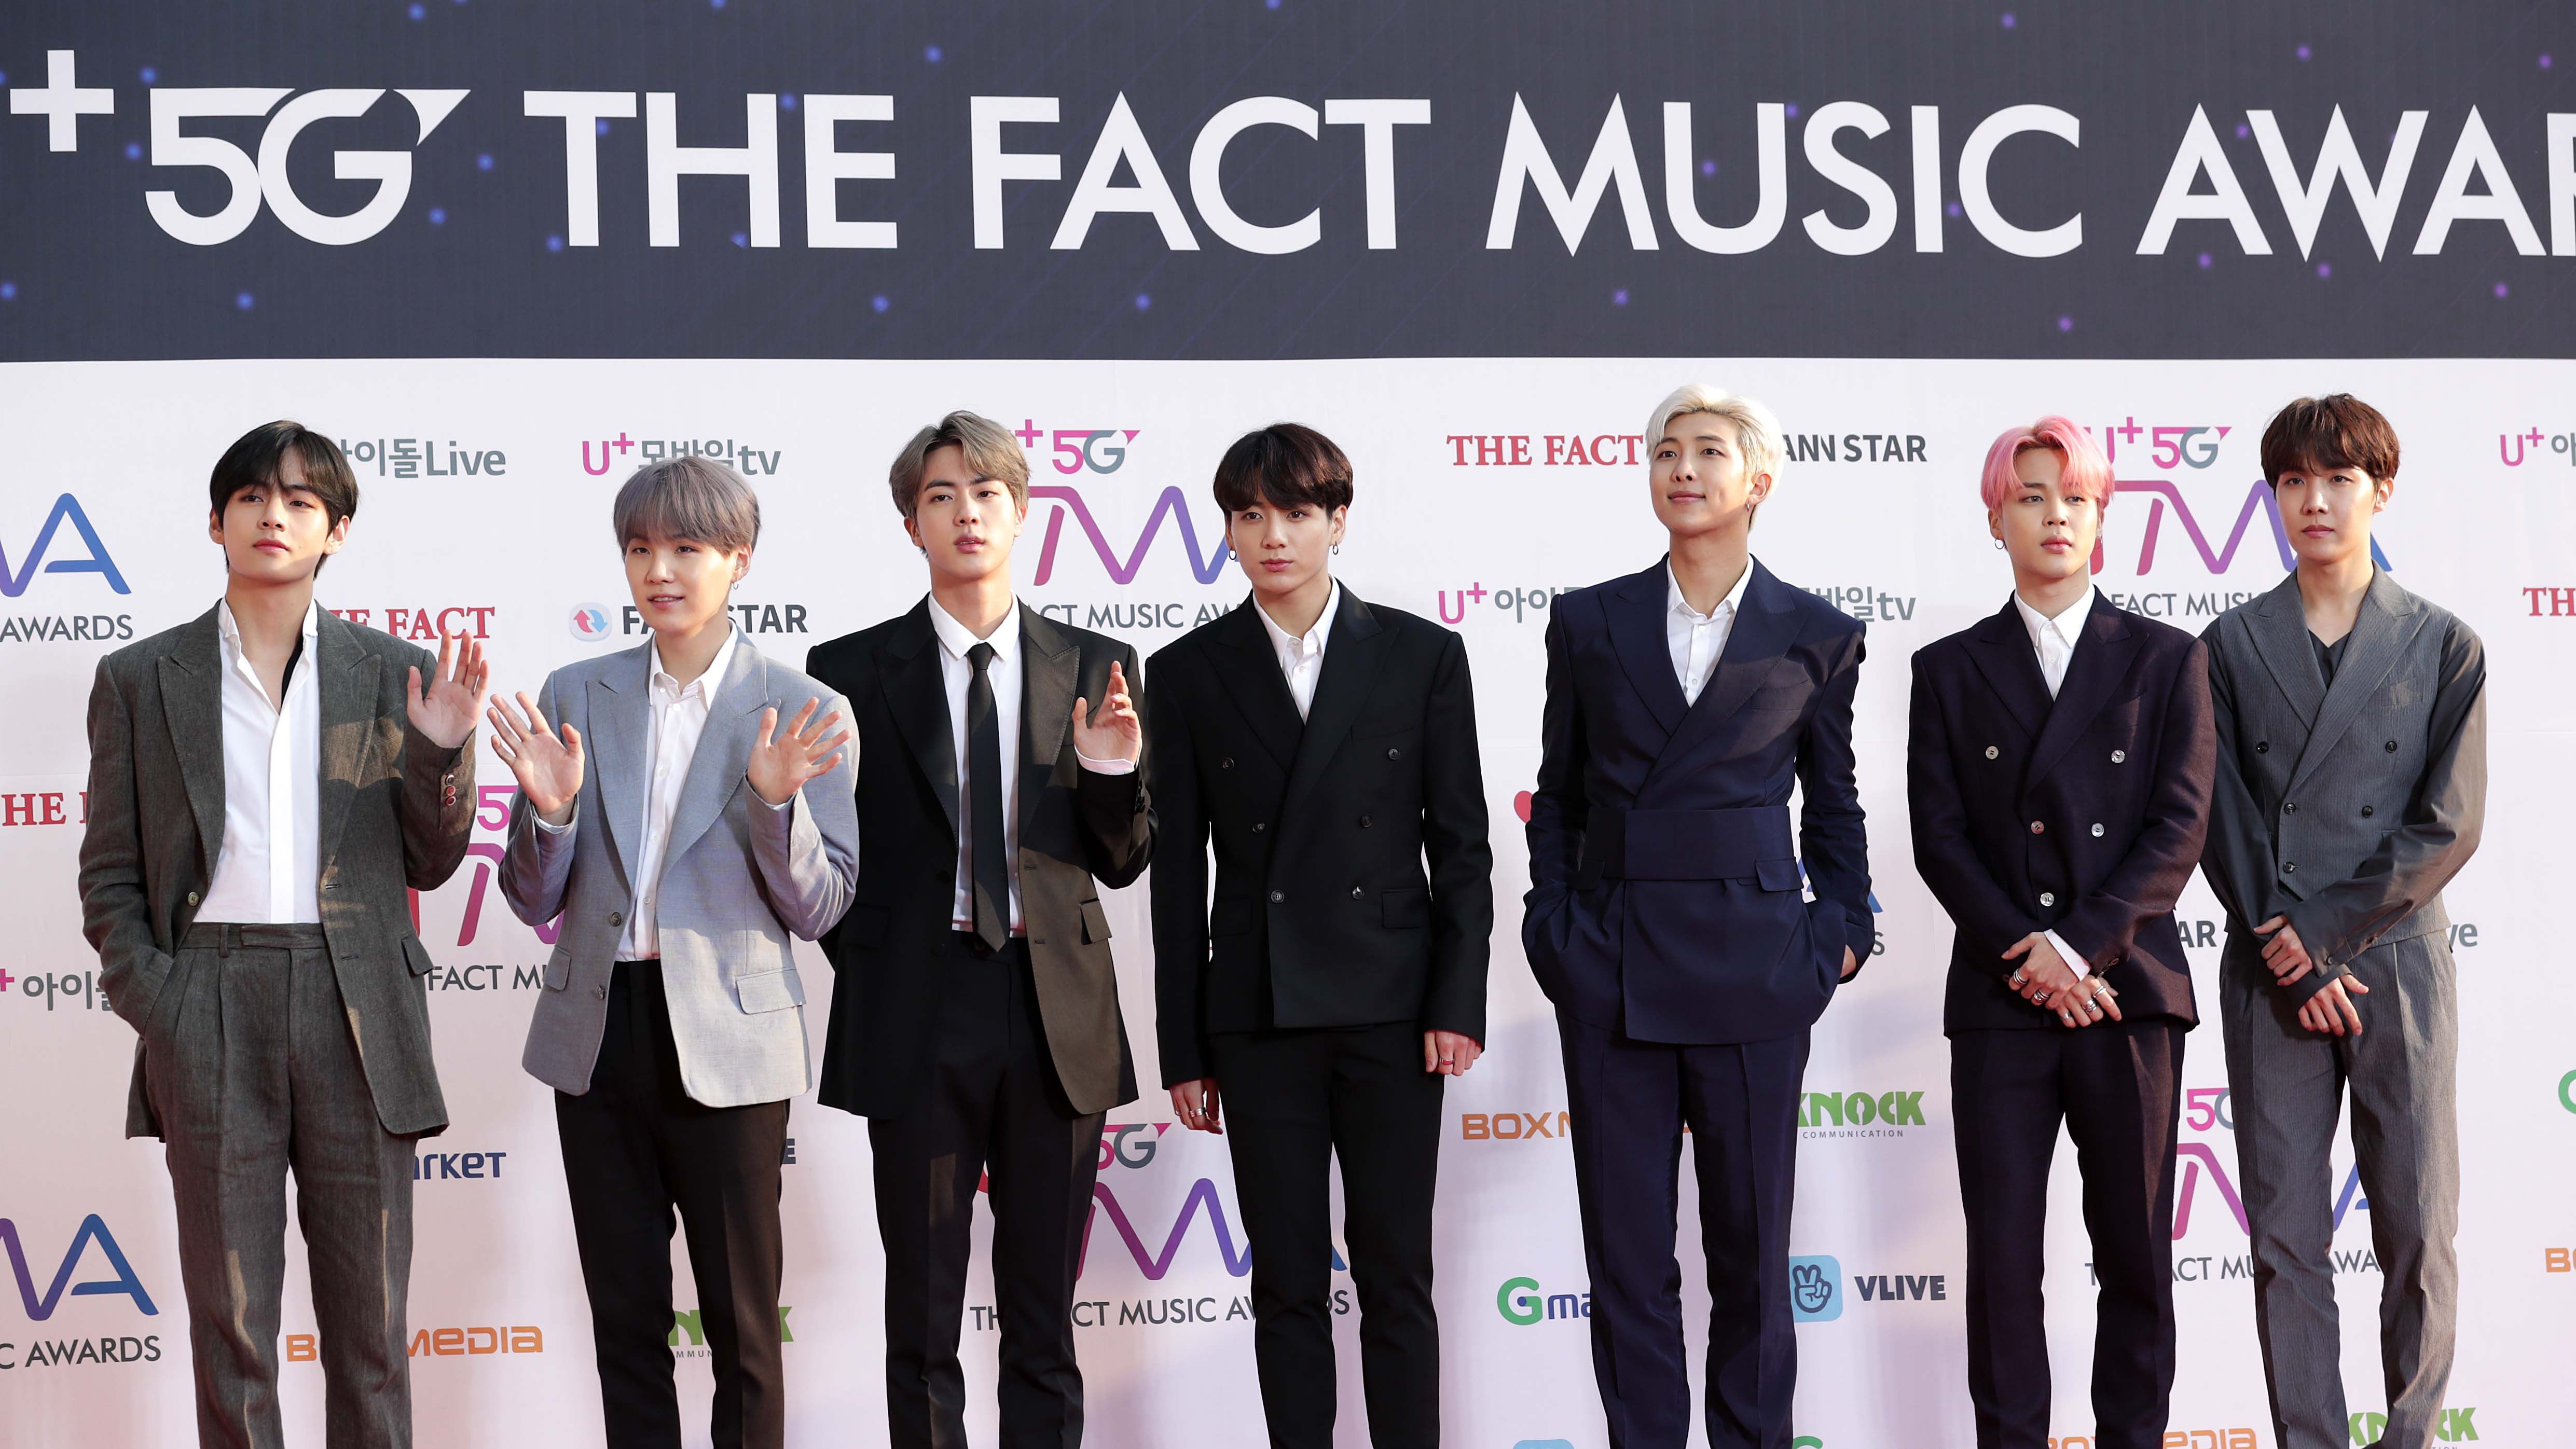 What's Next For Each Member Of BTS?